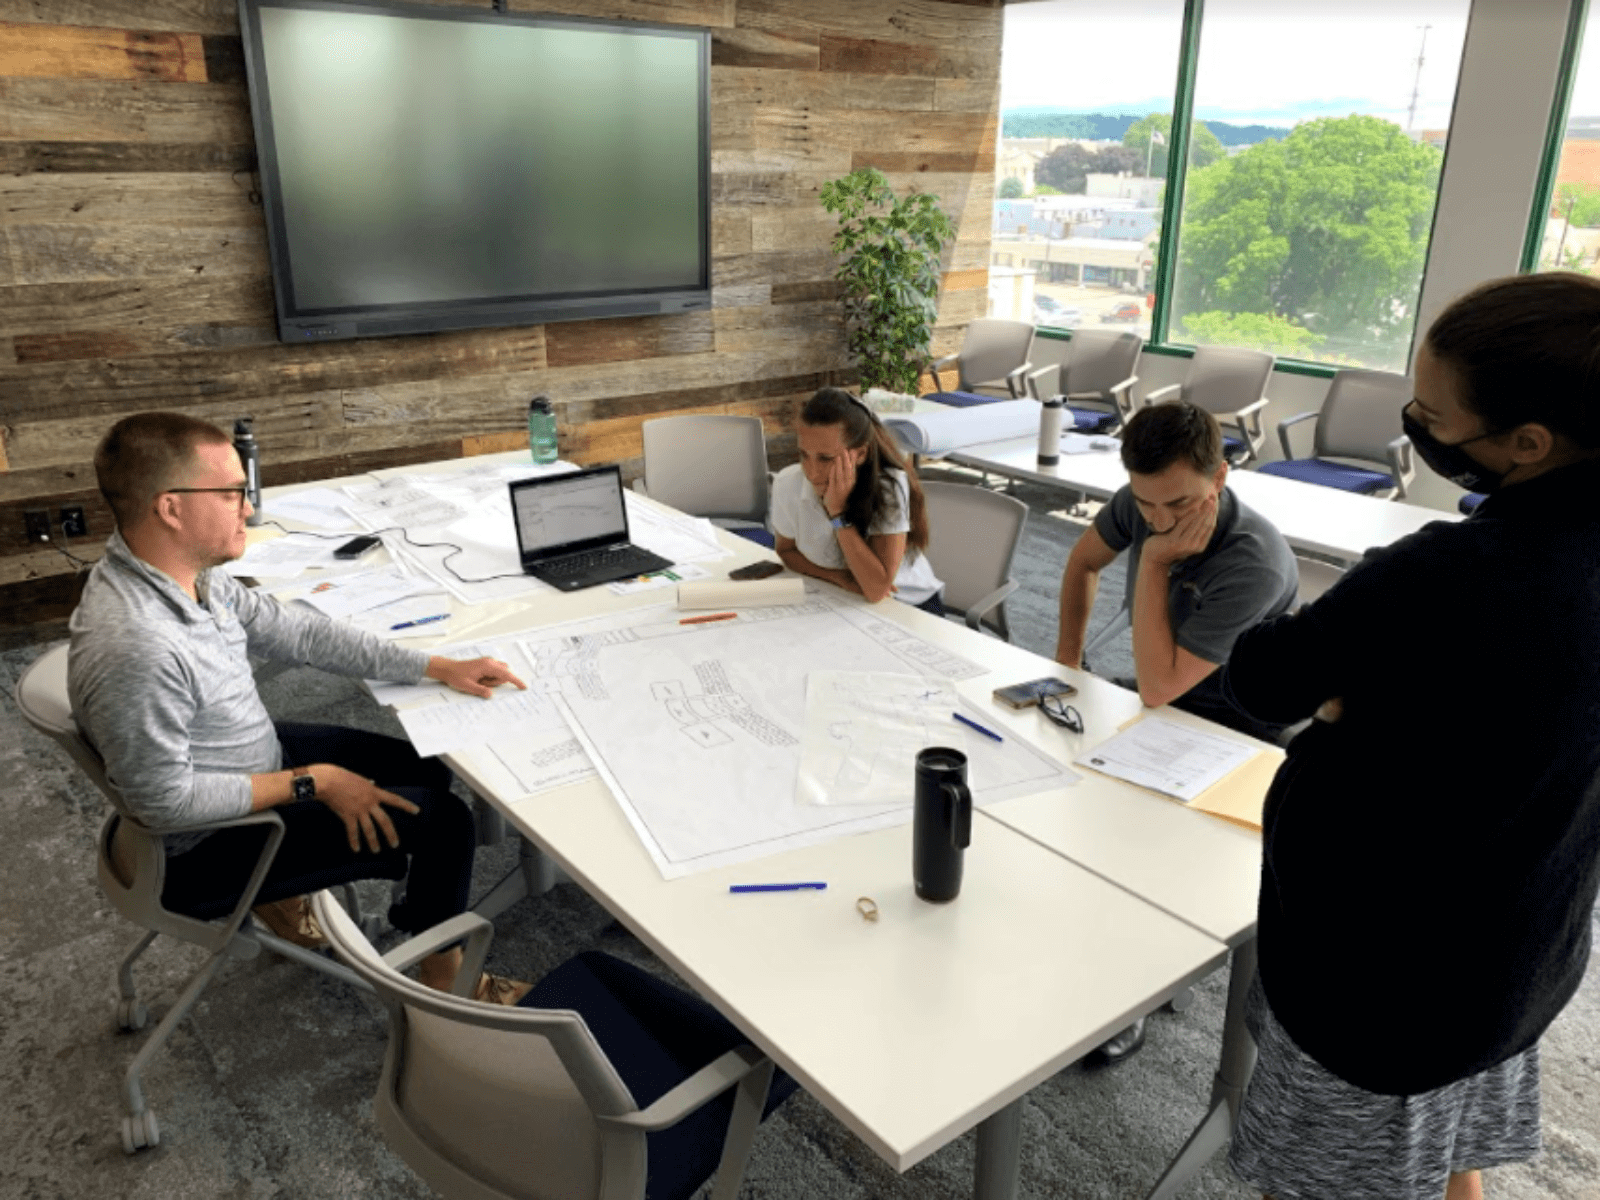 A team of civic architects reviewing a blueprint sitting at a table in a room with a large tv on the wall.